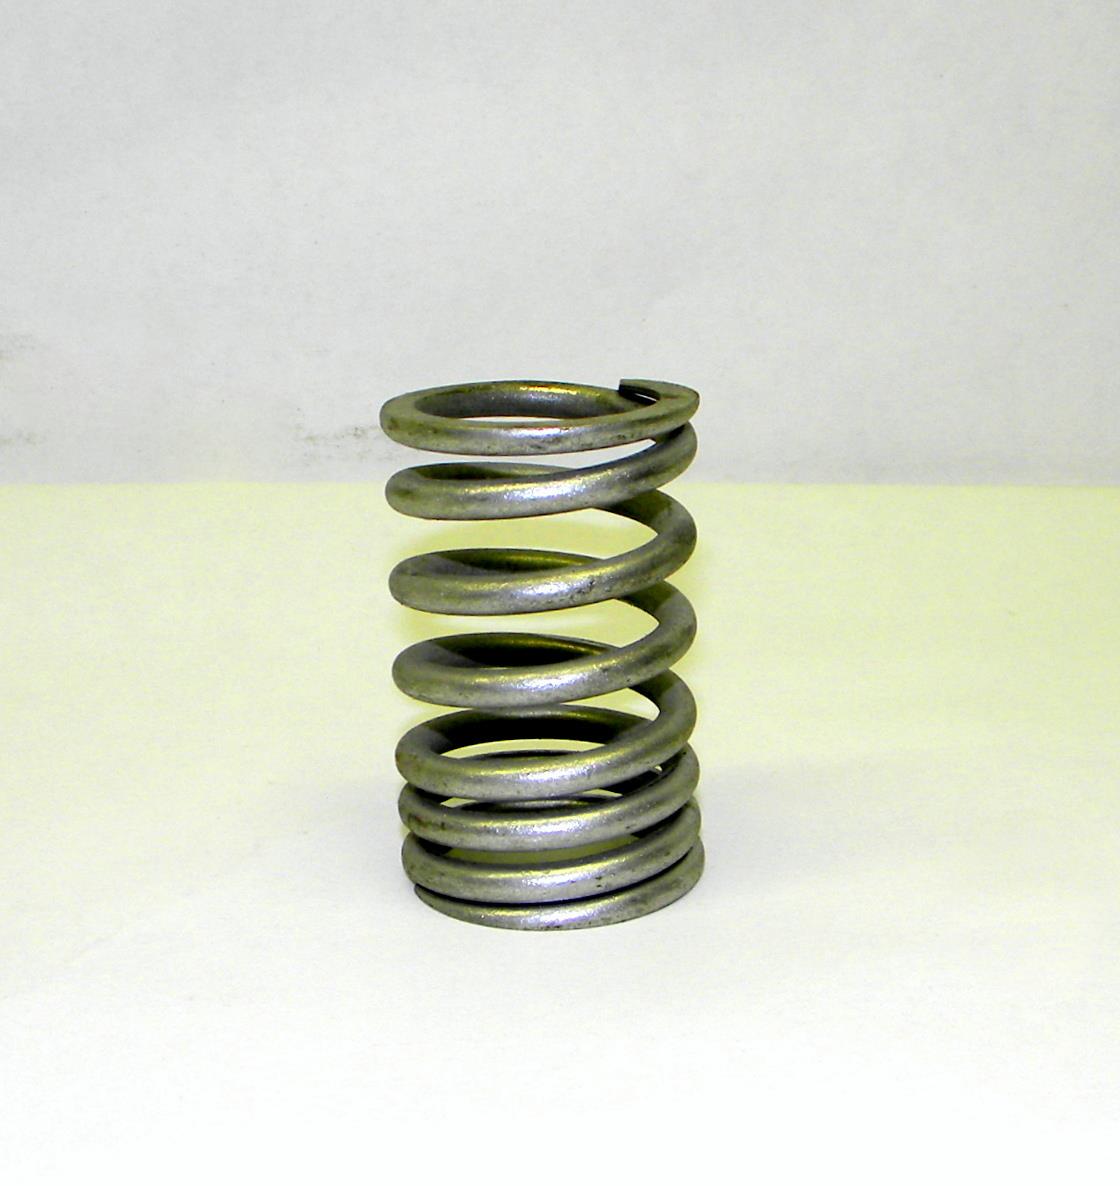 M35-491 | 5360-00-848-8399 Outer Valve Spring for M35A2 Series with Multi-Fuel Engine. NOS.  (1).JPG